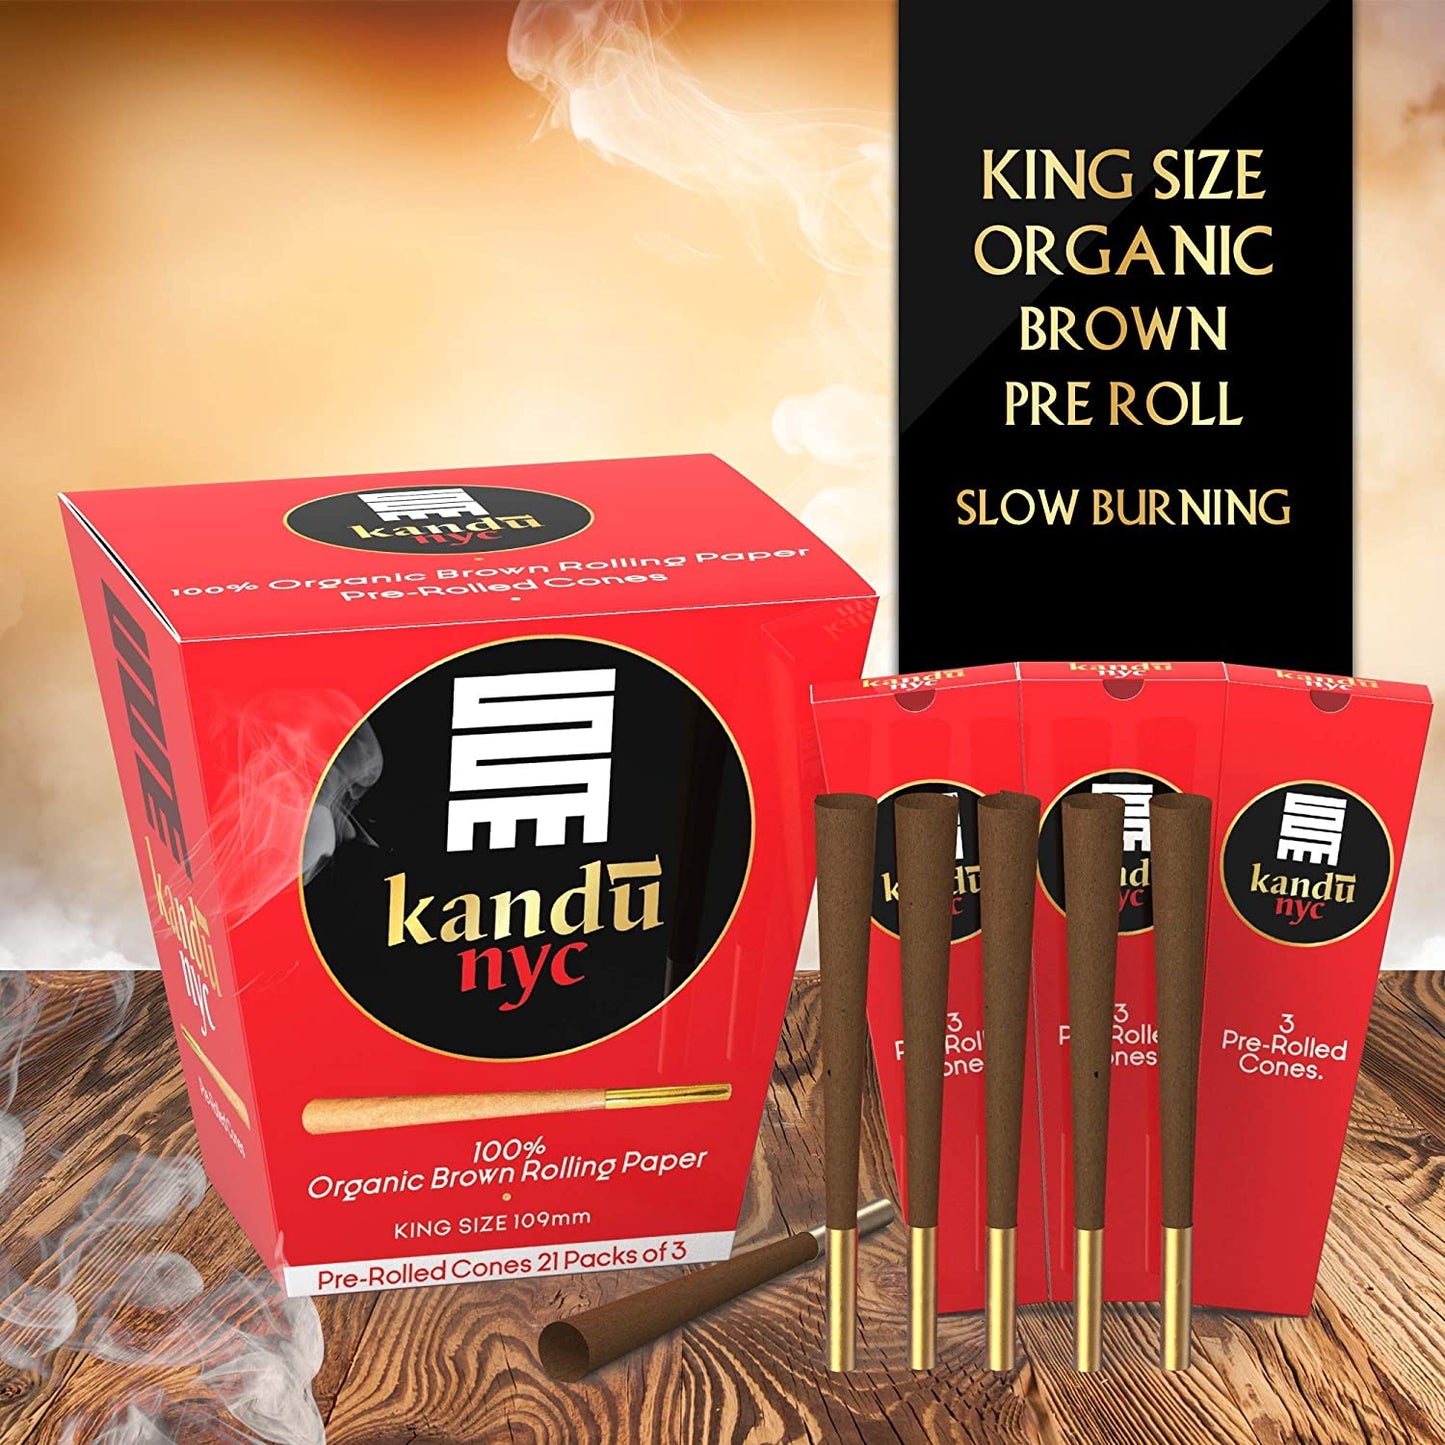 Kandu NYC King Size Pre Rolled Cones, Display Box 21 Count with 3 Cones Each Flower Power Packages 